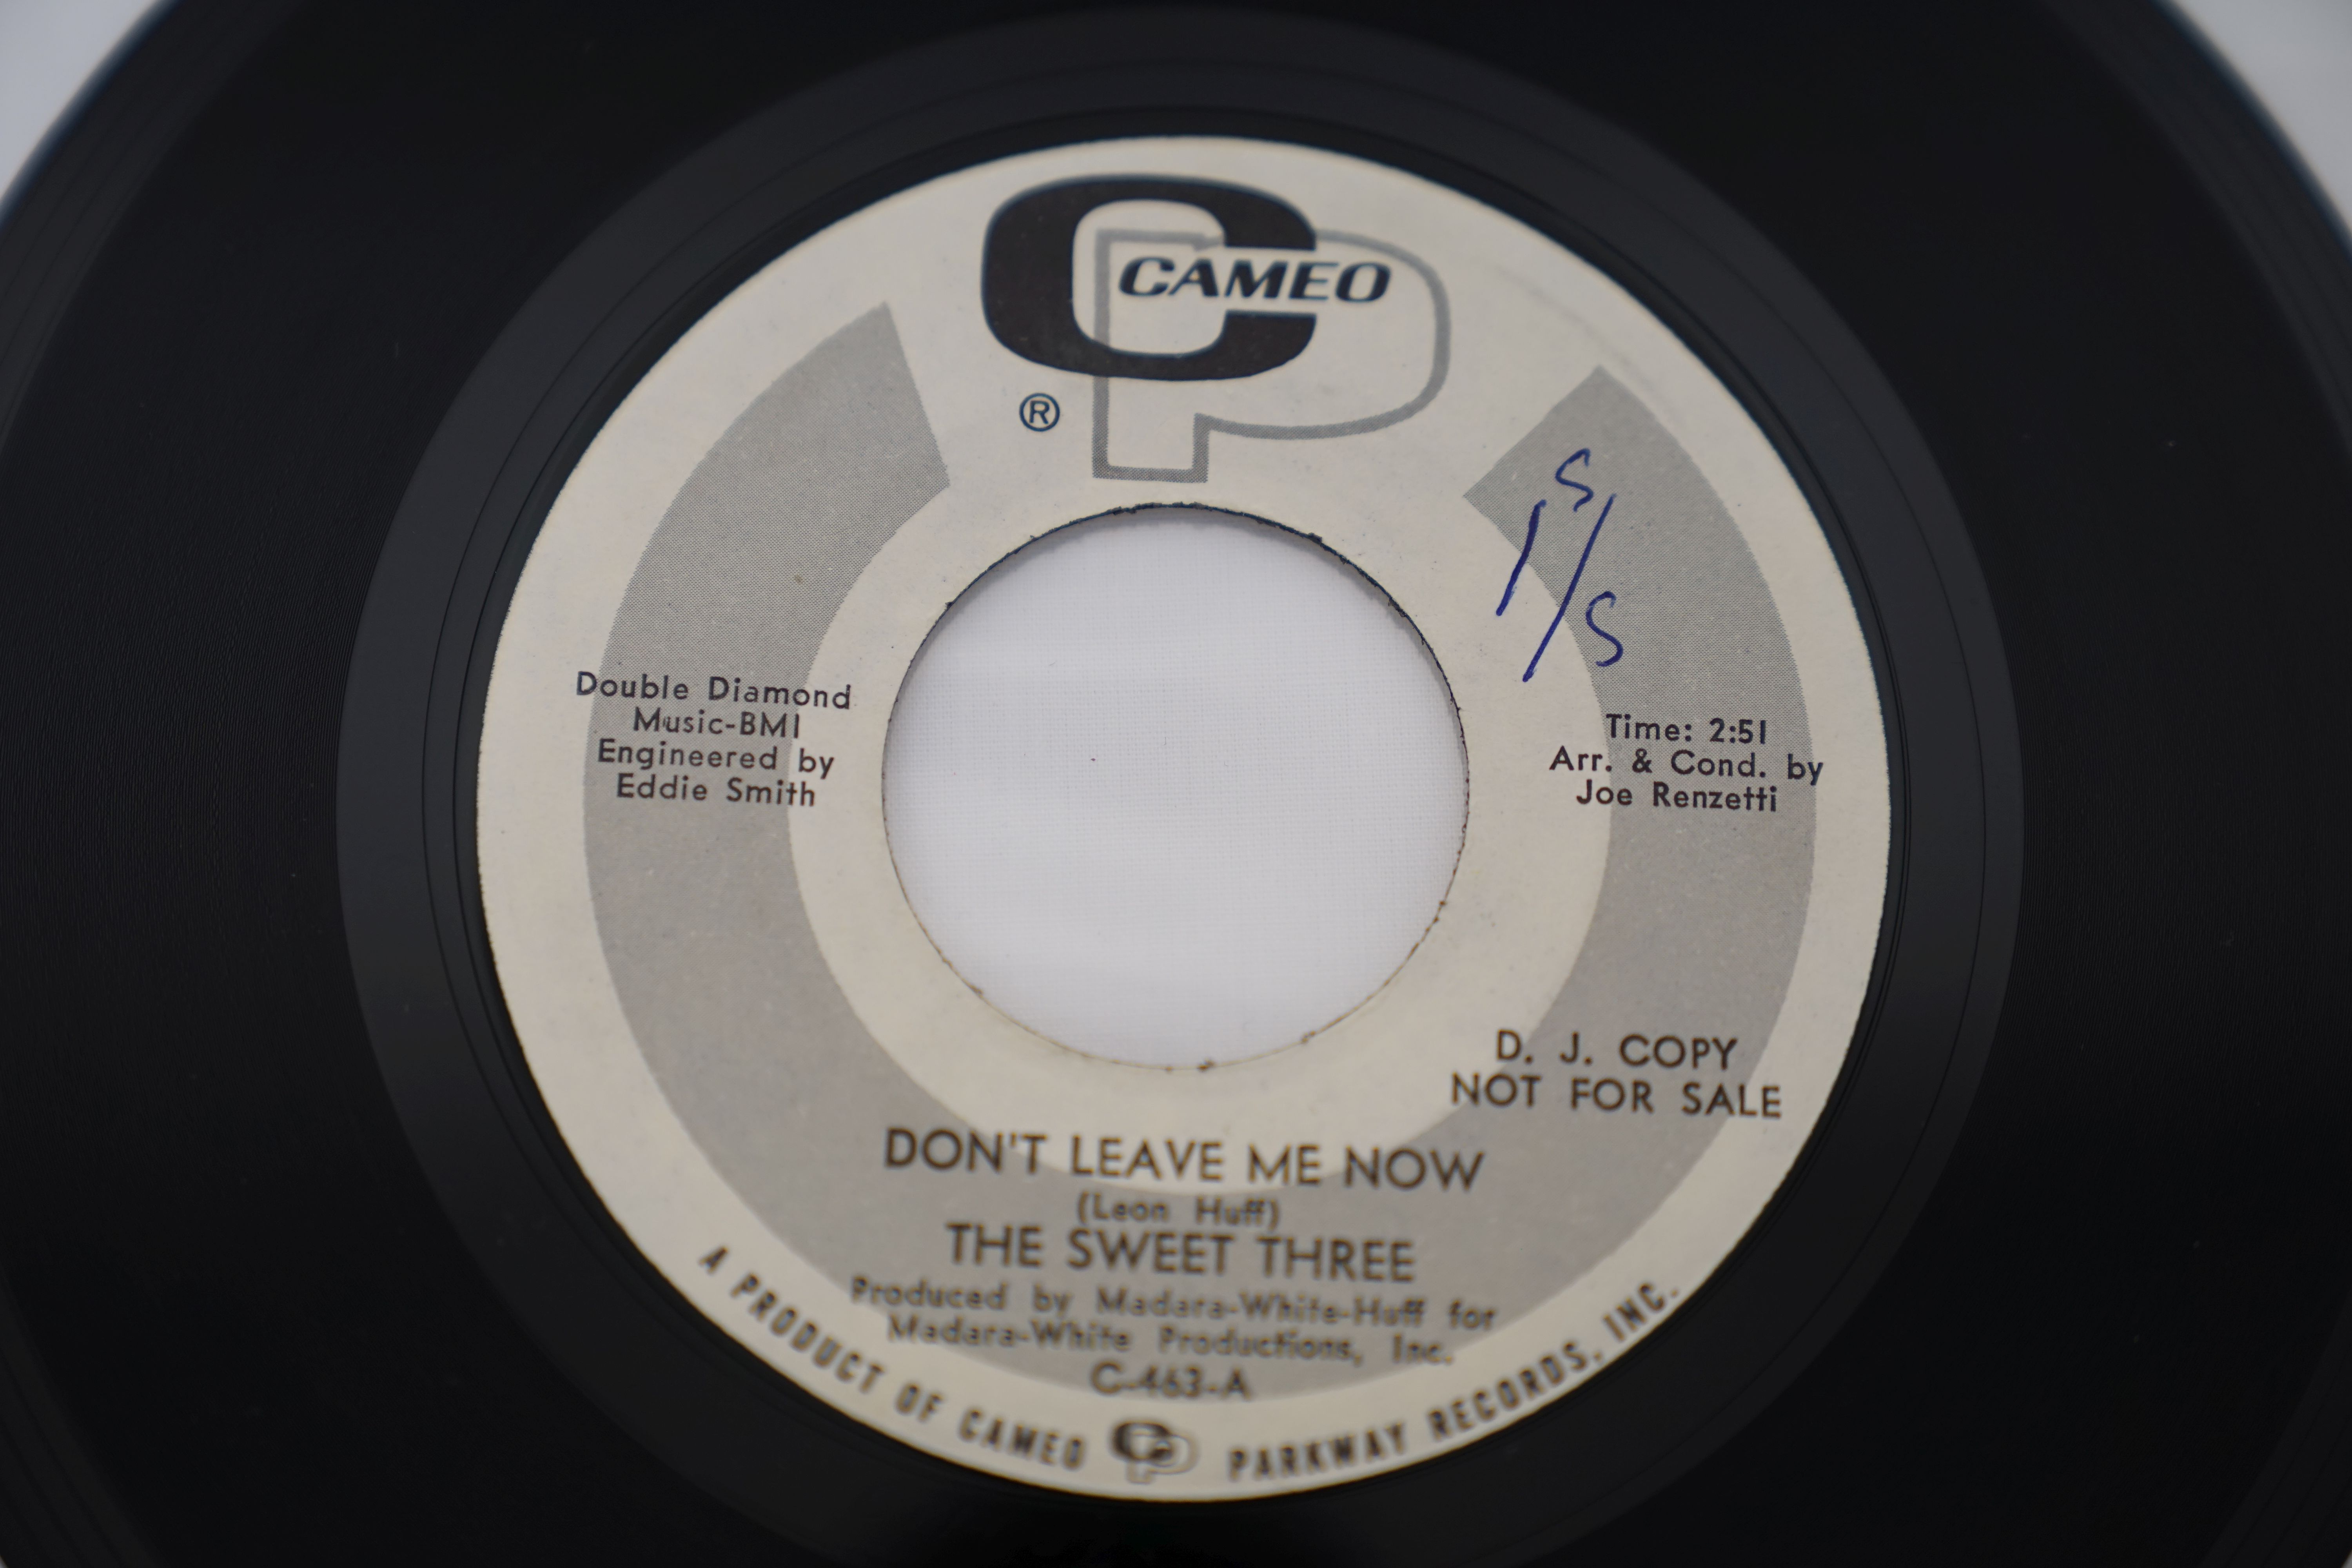 Vinyl - 3 rare Original US 1st pressing Northern Soul single on the Cameo Parkway label. The Sweet - Image 16 of 17